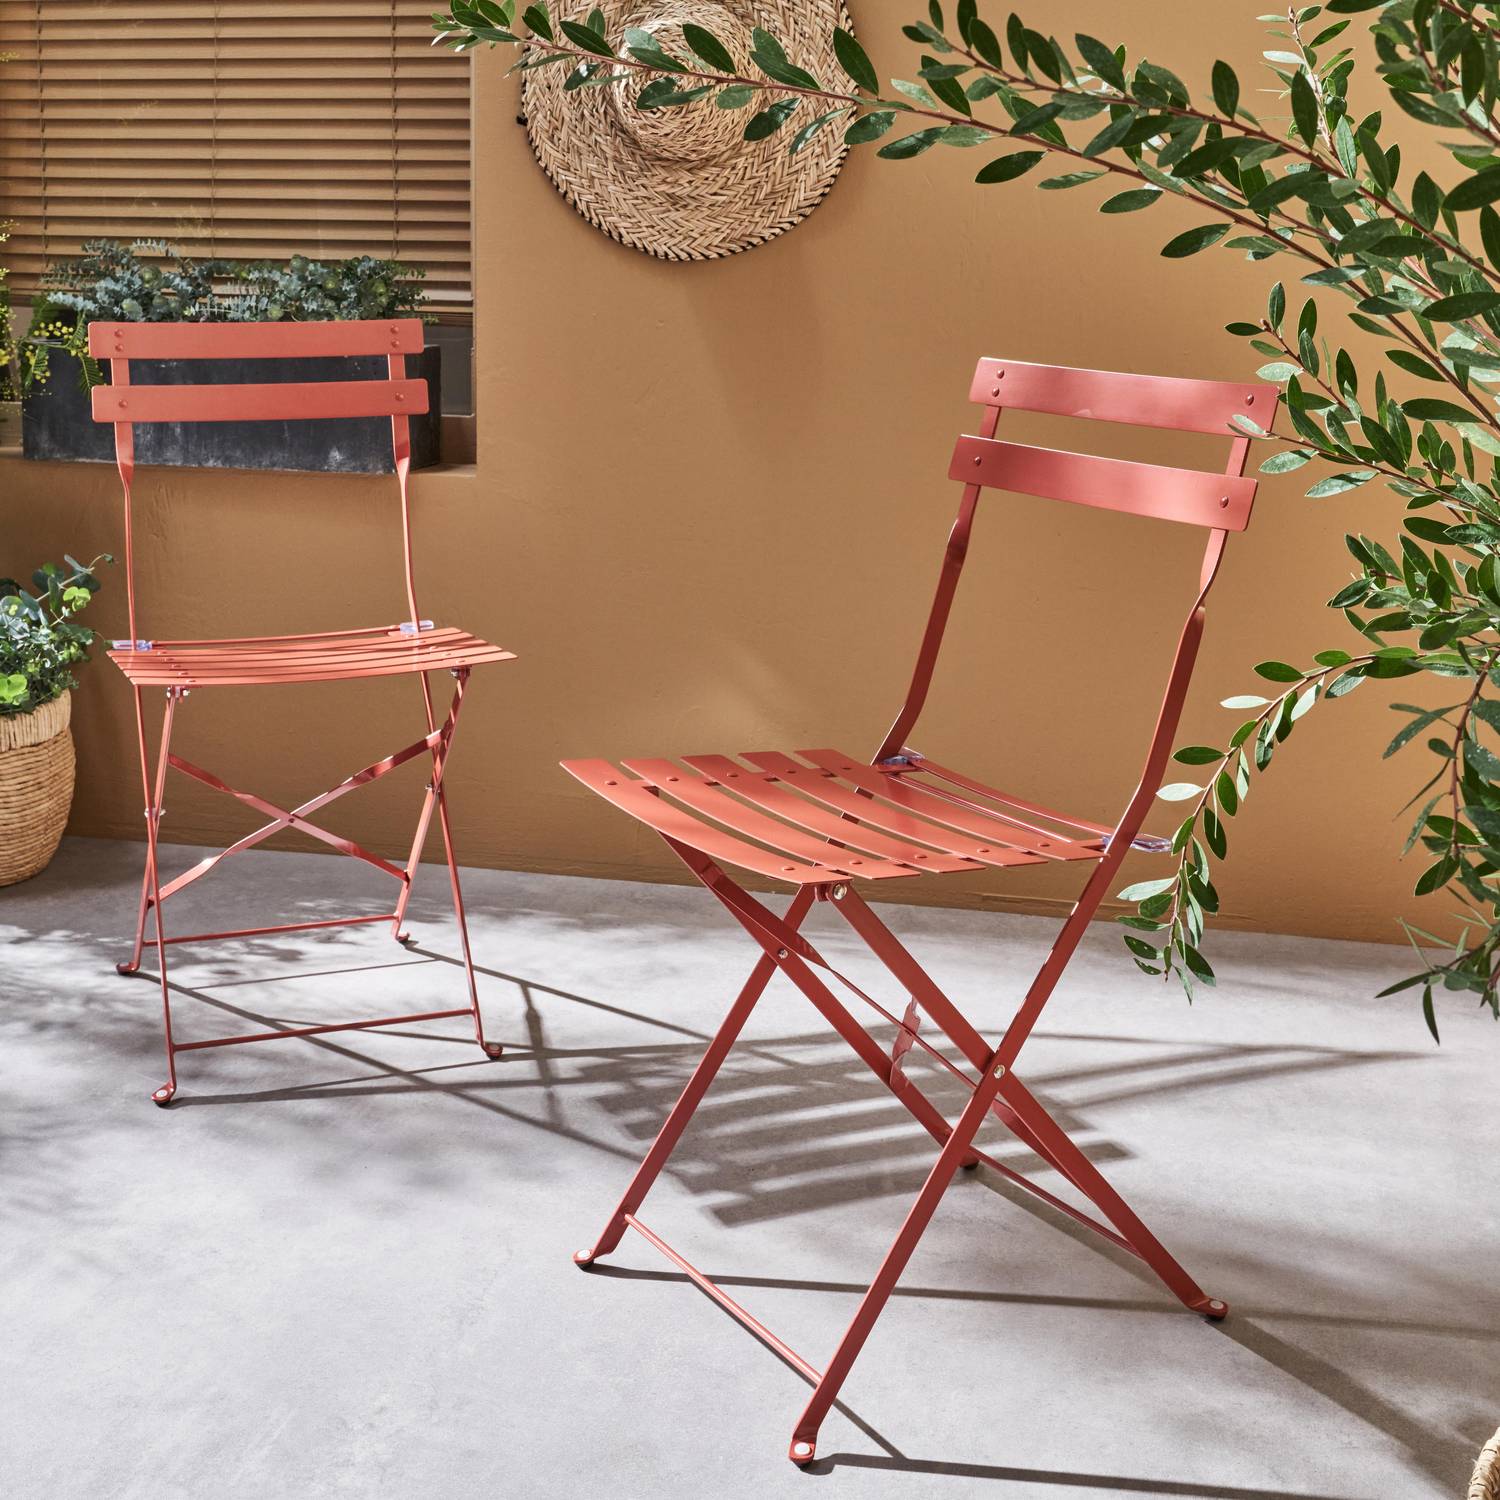 Set of 2 foldable bistro chairs - Emilia terracotta - Thermo-lacquered steel Photo1